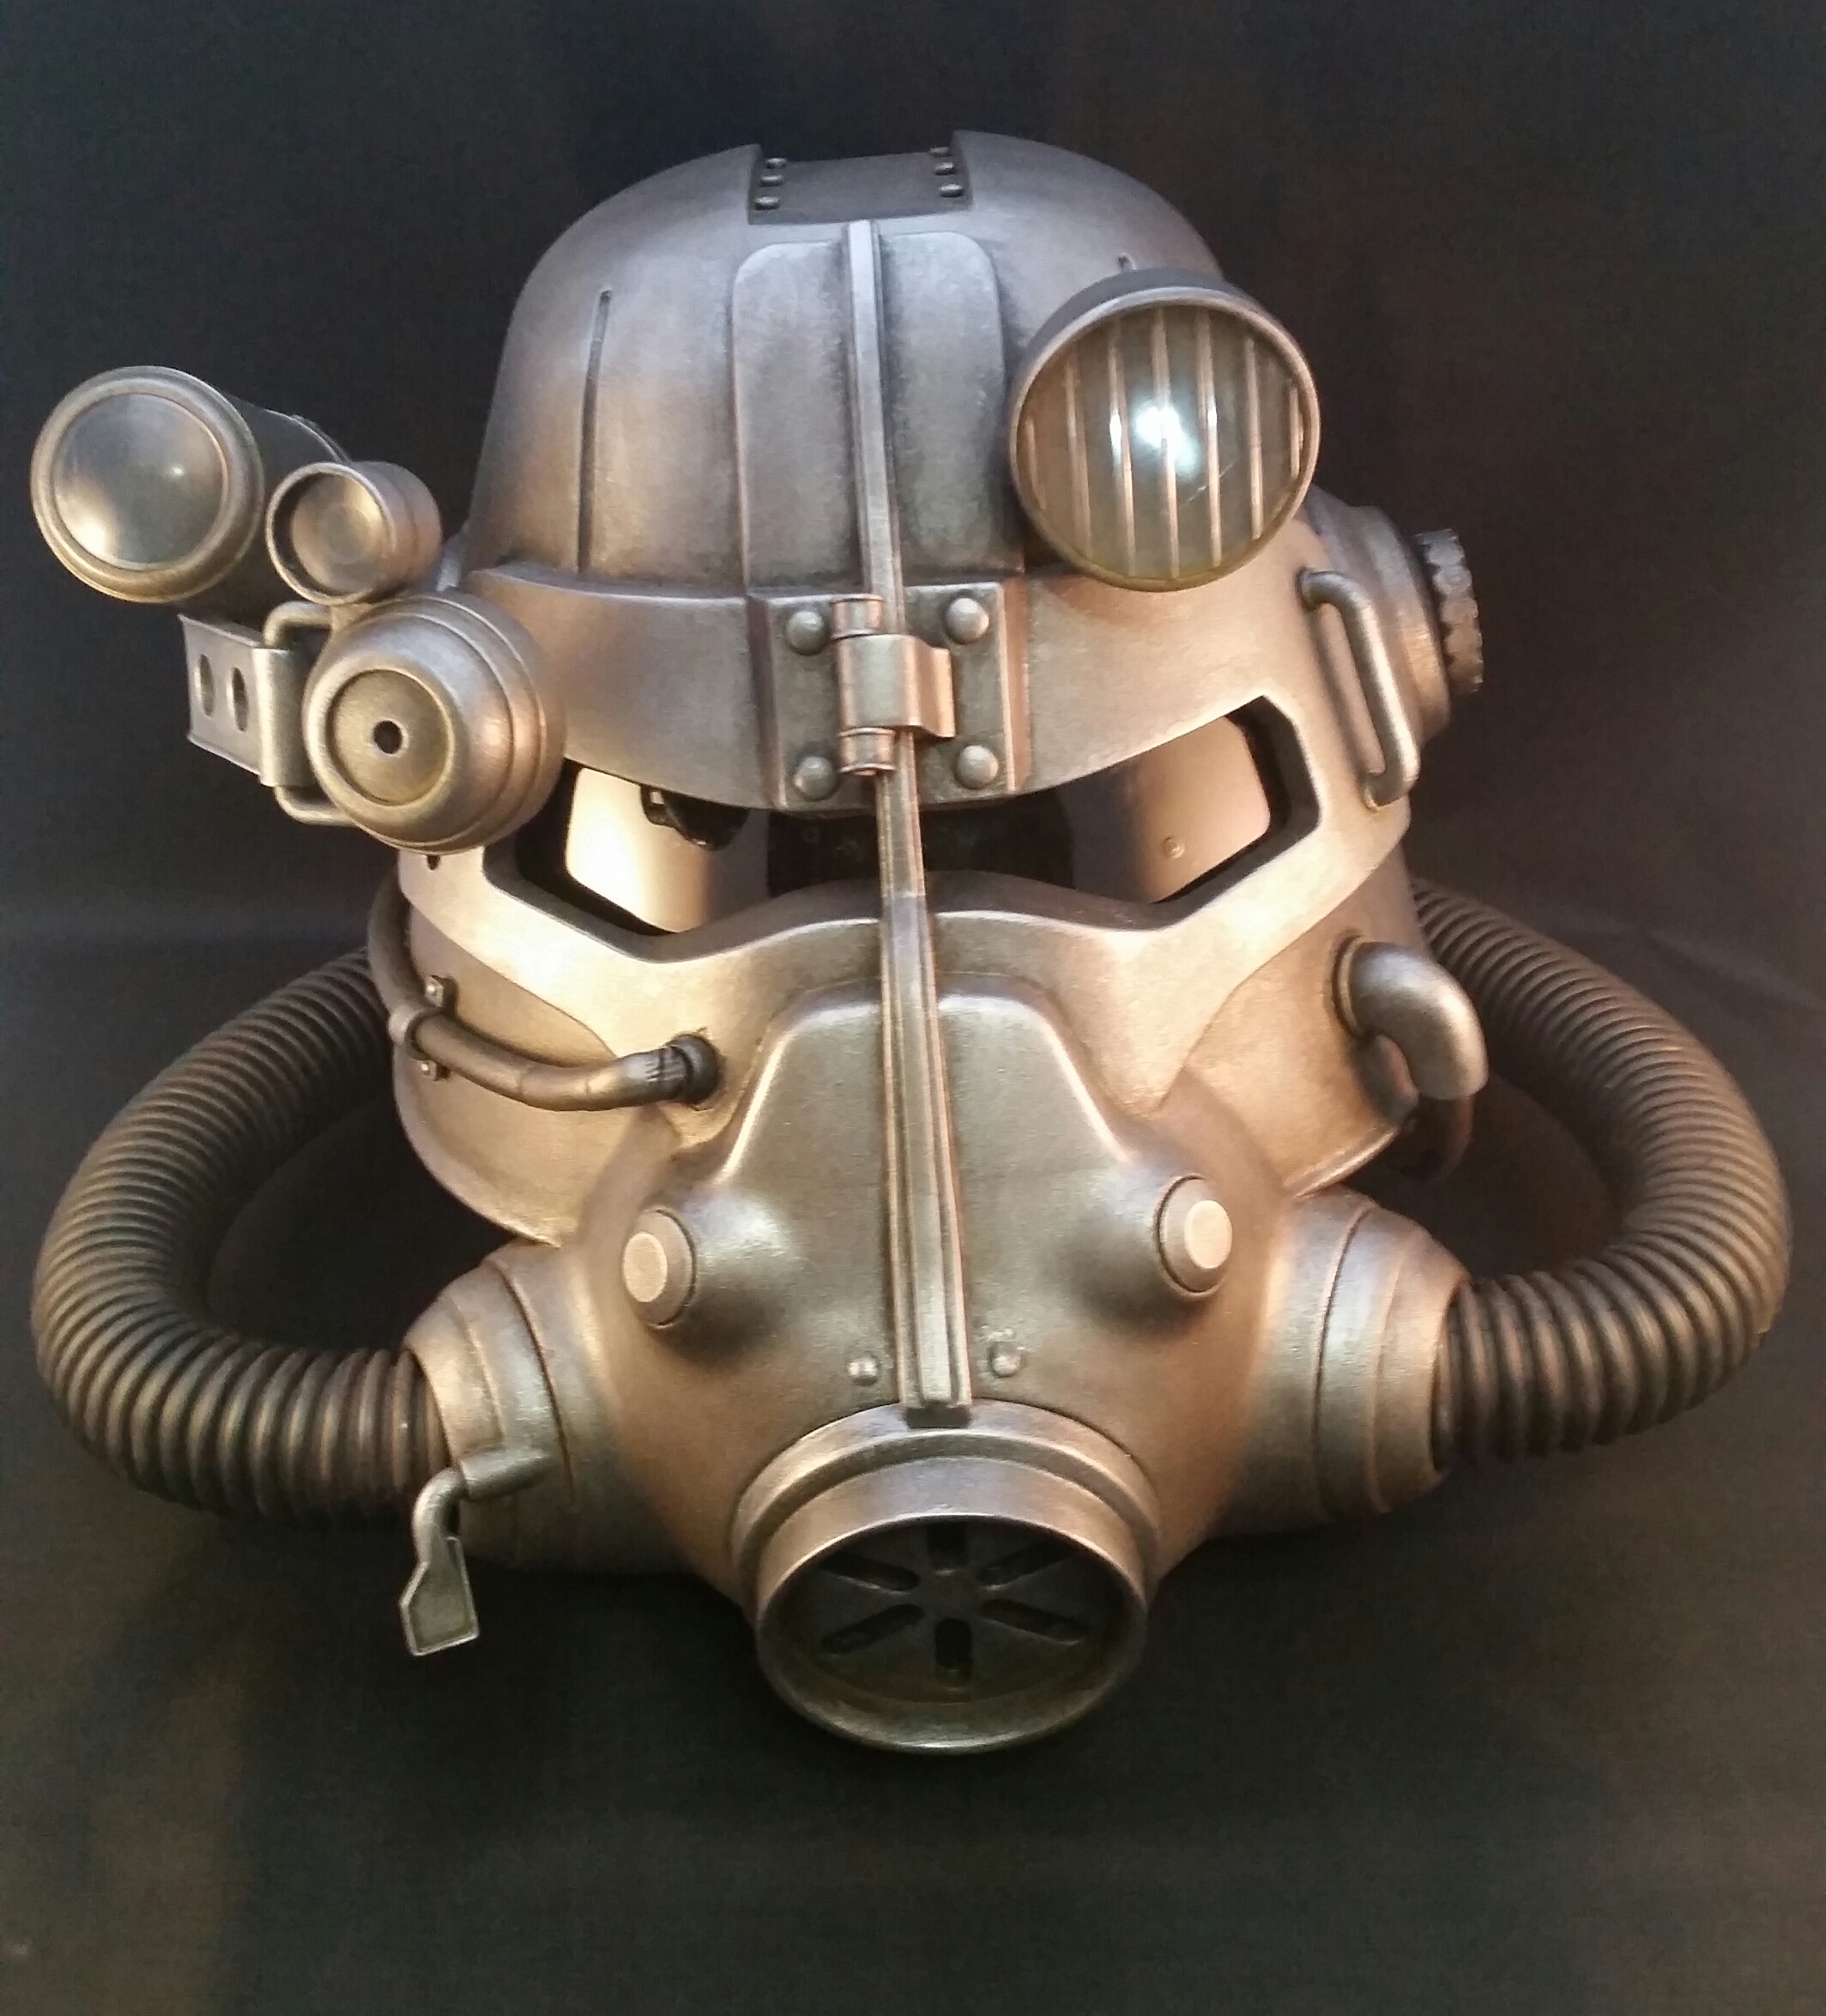 client Swimming pool skirt Maker Faire | Fallout Power Armor--Build Anything with EVA Foam!